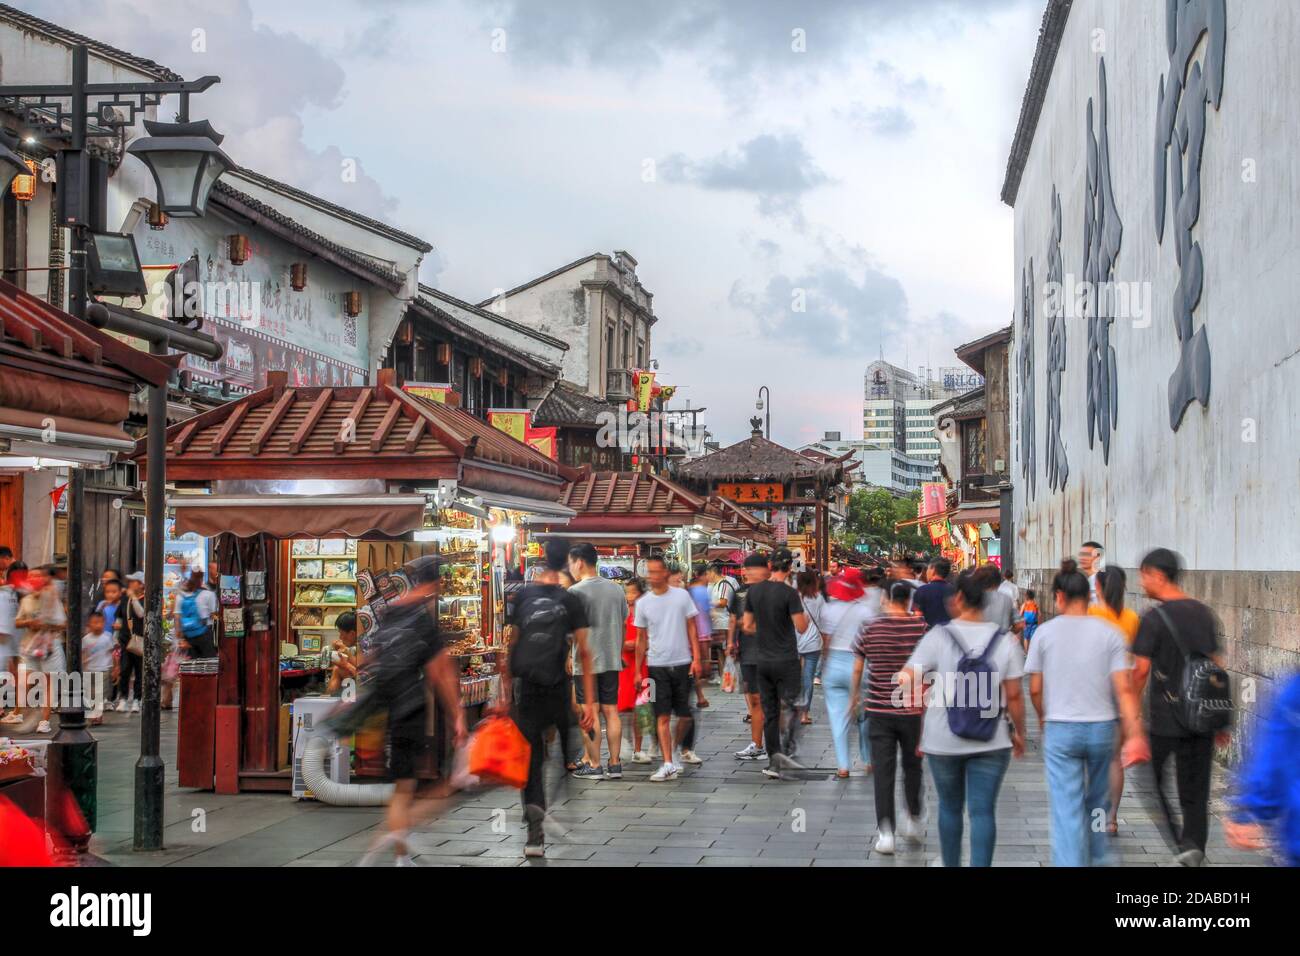 Hangzhou, China - August 3, 2019 - Evening scene along the historical Hefang Street in Hangzhou, China, with many chinese medicine and souvenirs shops Stock Photo